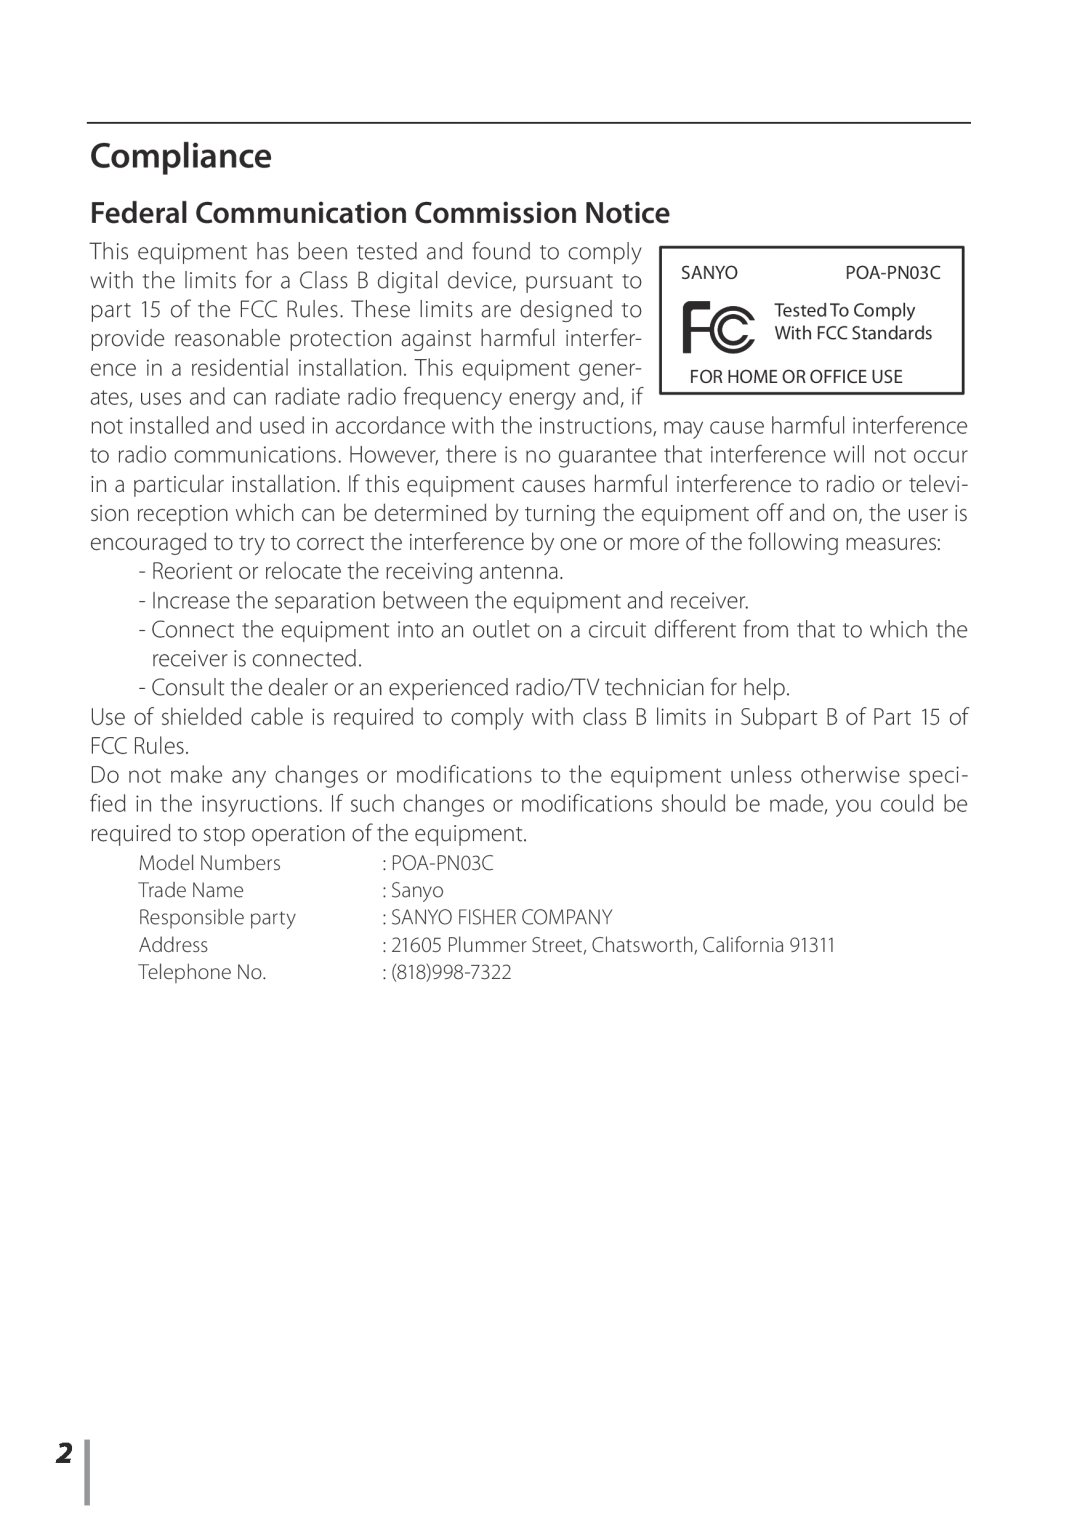 Sanyo POA-PN03C owner manual Compliance, Federal Communication Commission Notice 